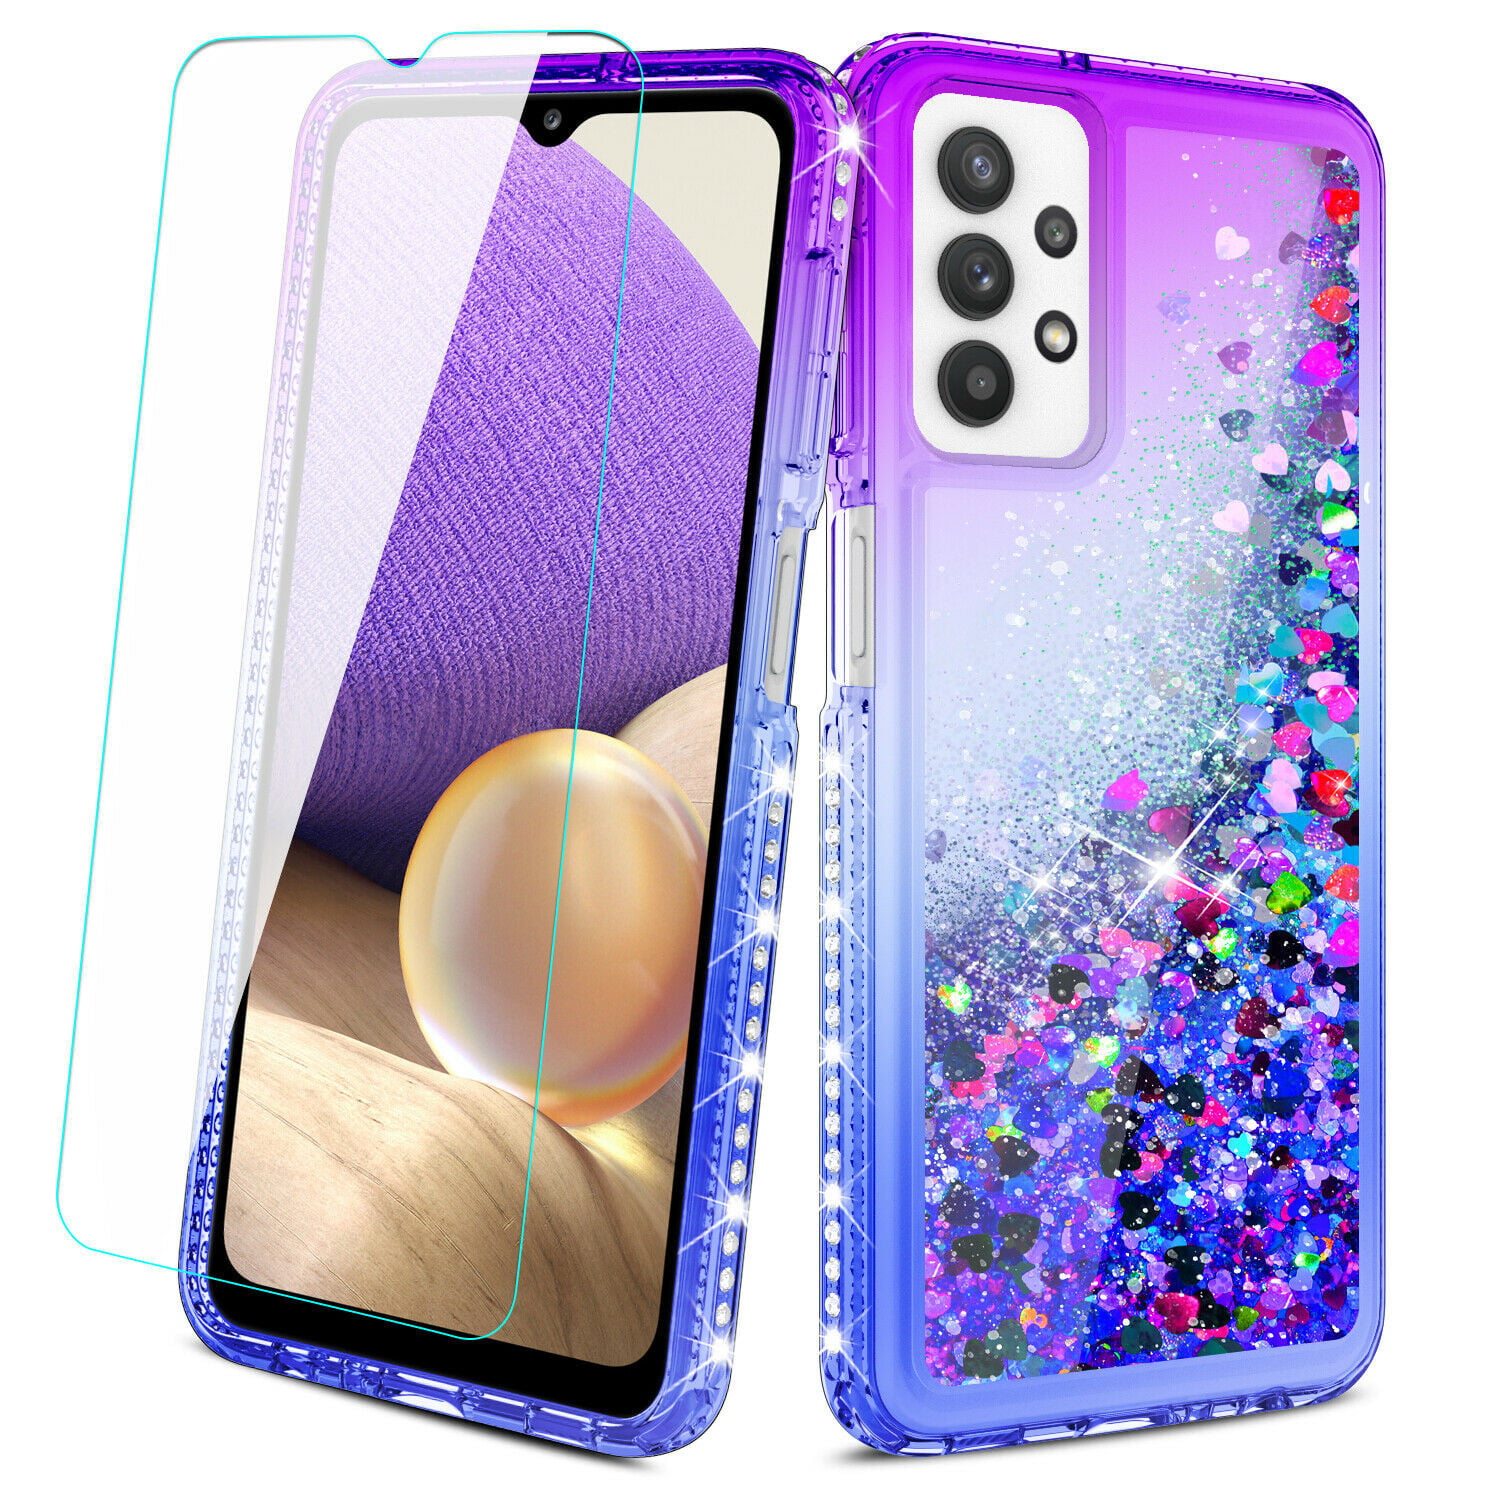 STENES Bling Wallet Case Compatible with LG Stylo 4 2 Pack 3D Handmade Pearl Butterfly Flowers Design Leather Case with Wrist Strap & Screen Protector - Purple